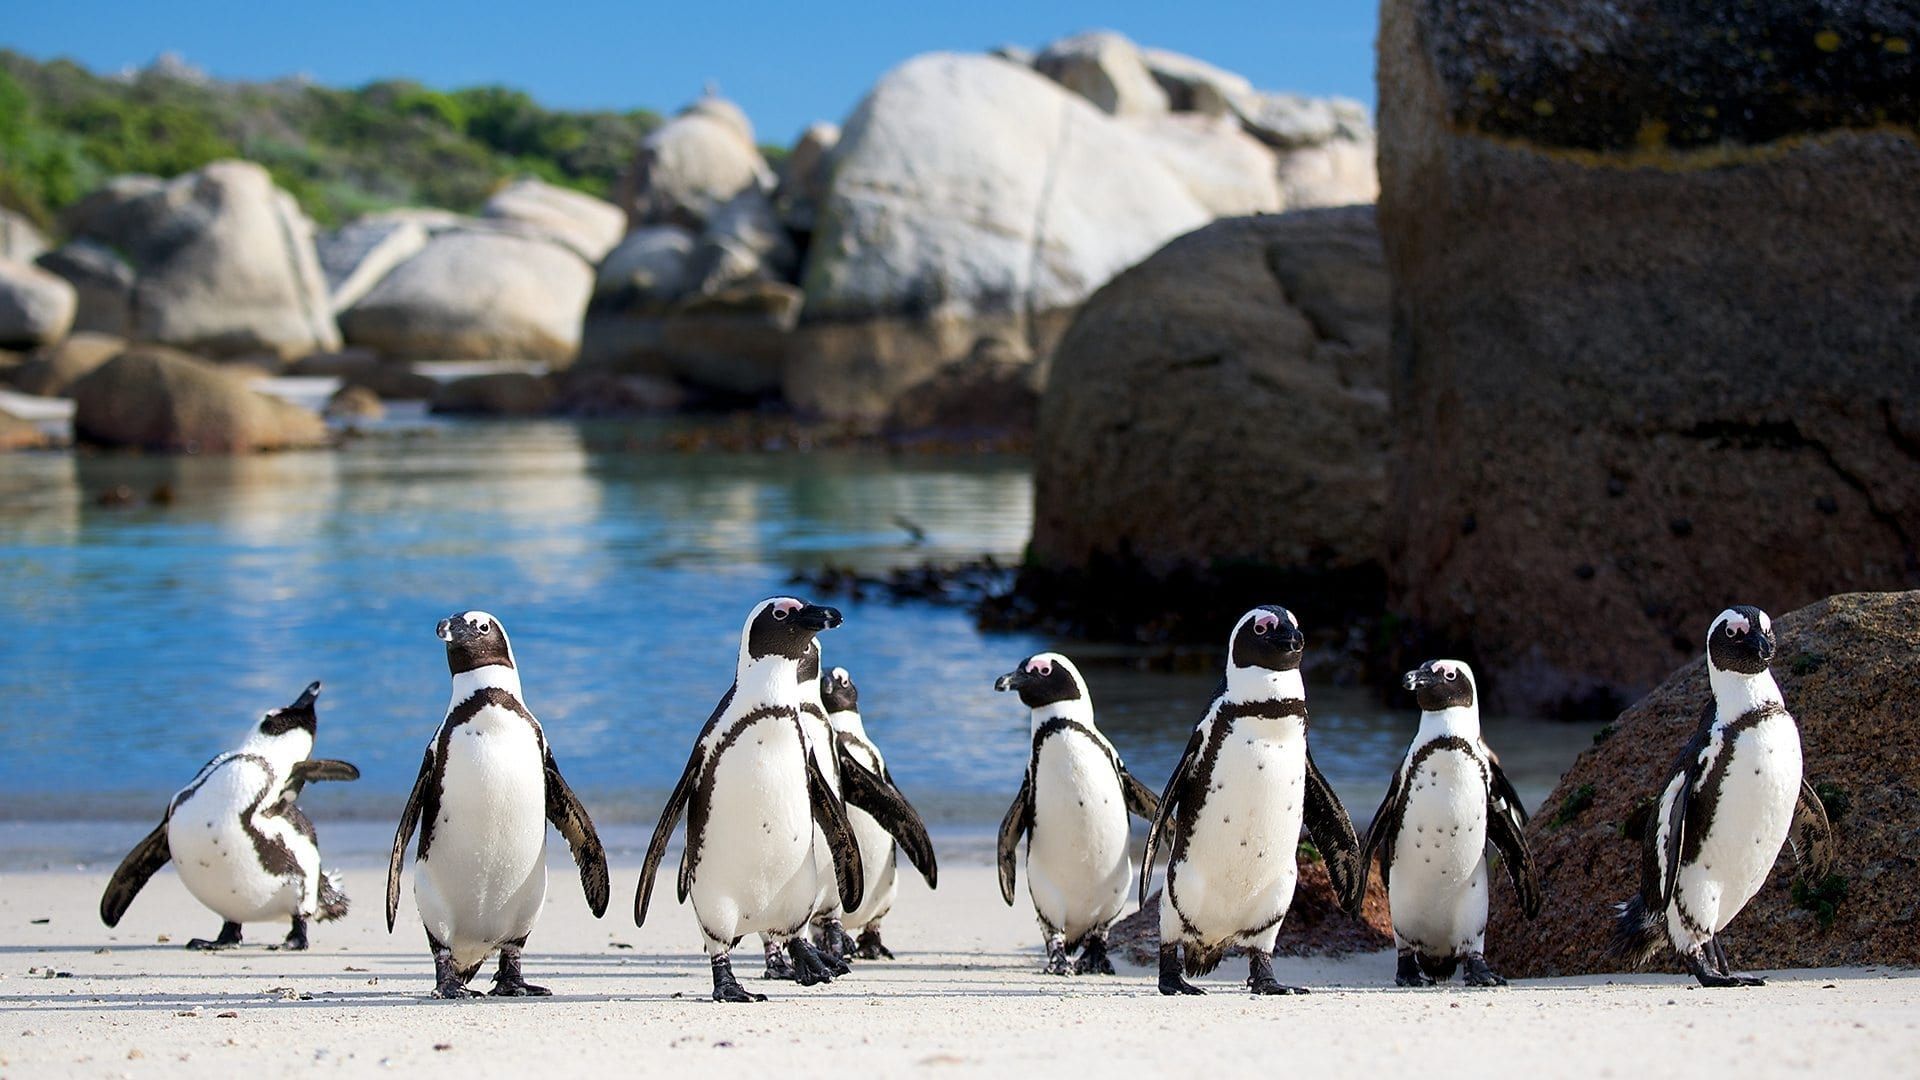 Penguins: Meet the Family background